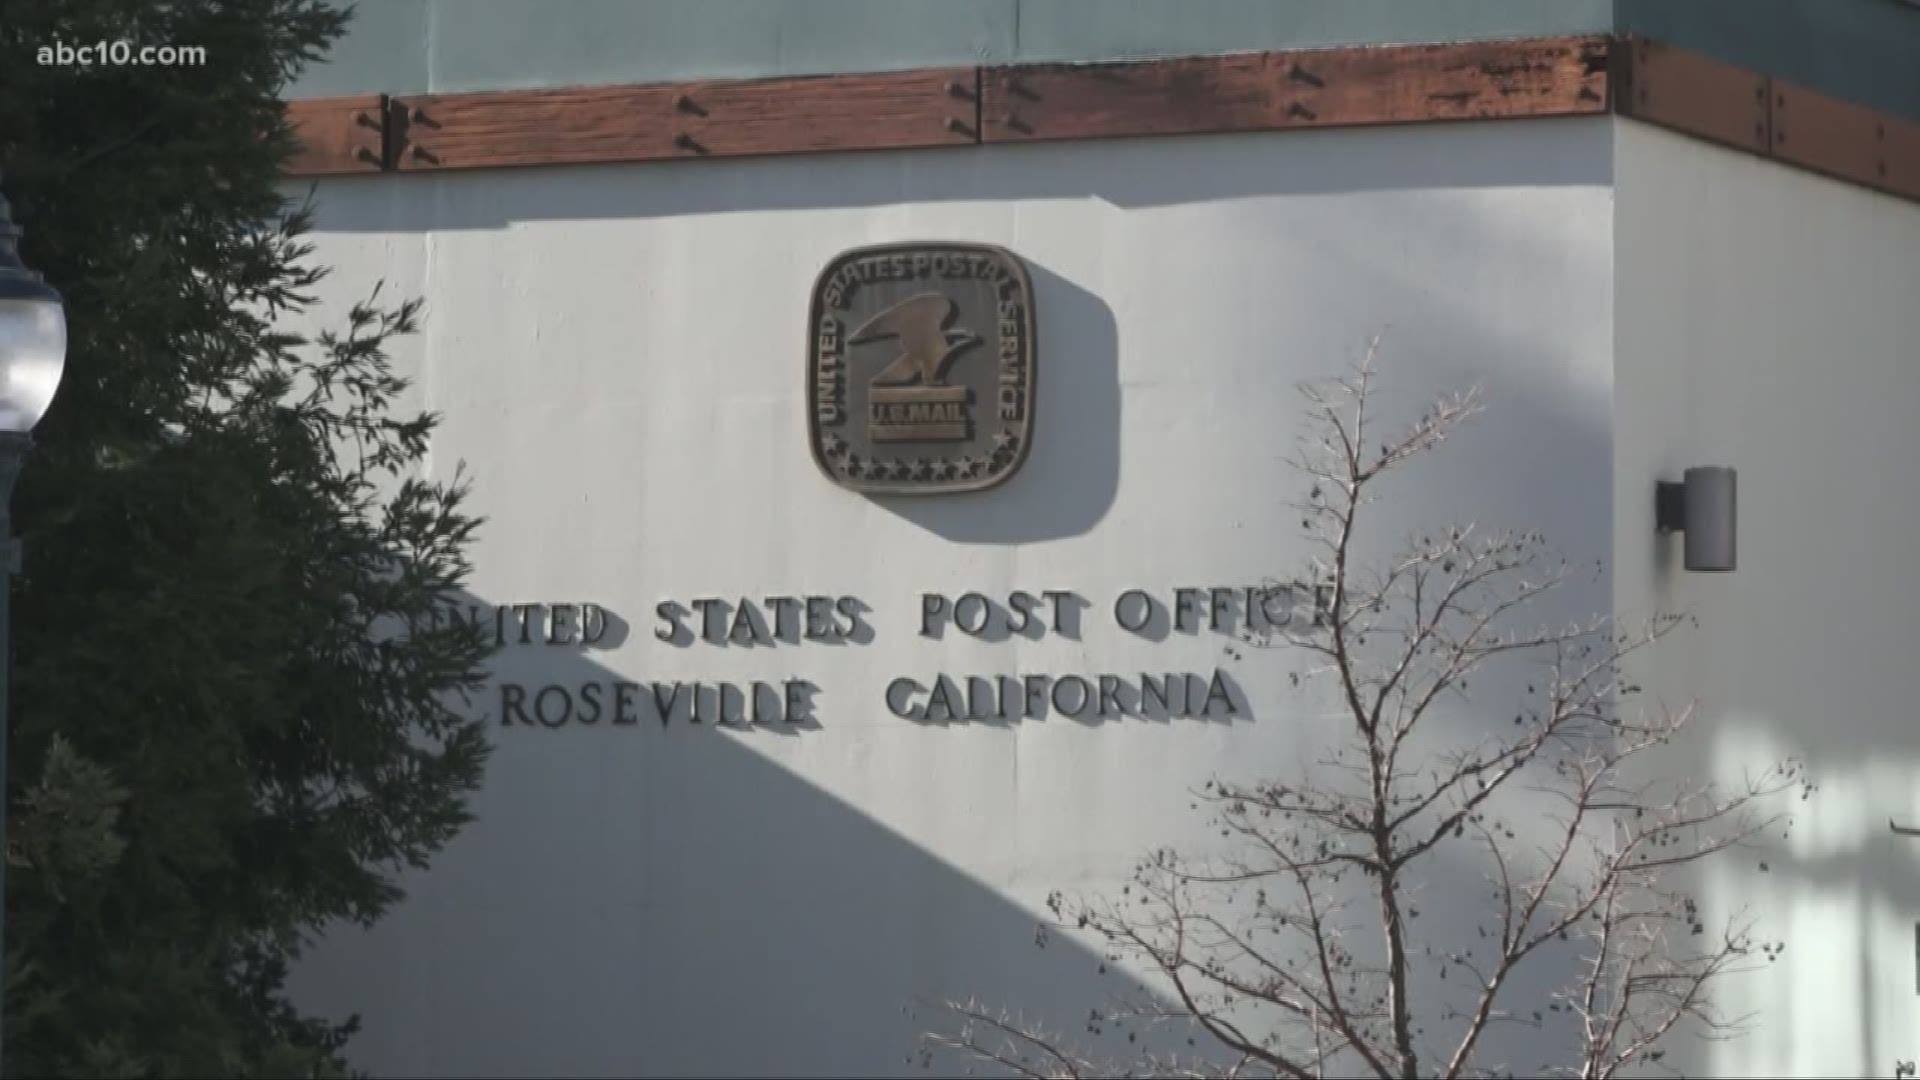 A Roseville post office will soon be shutting down, but if the city and neighbors have their way, it would not be moving in a location not too far away.